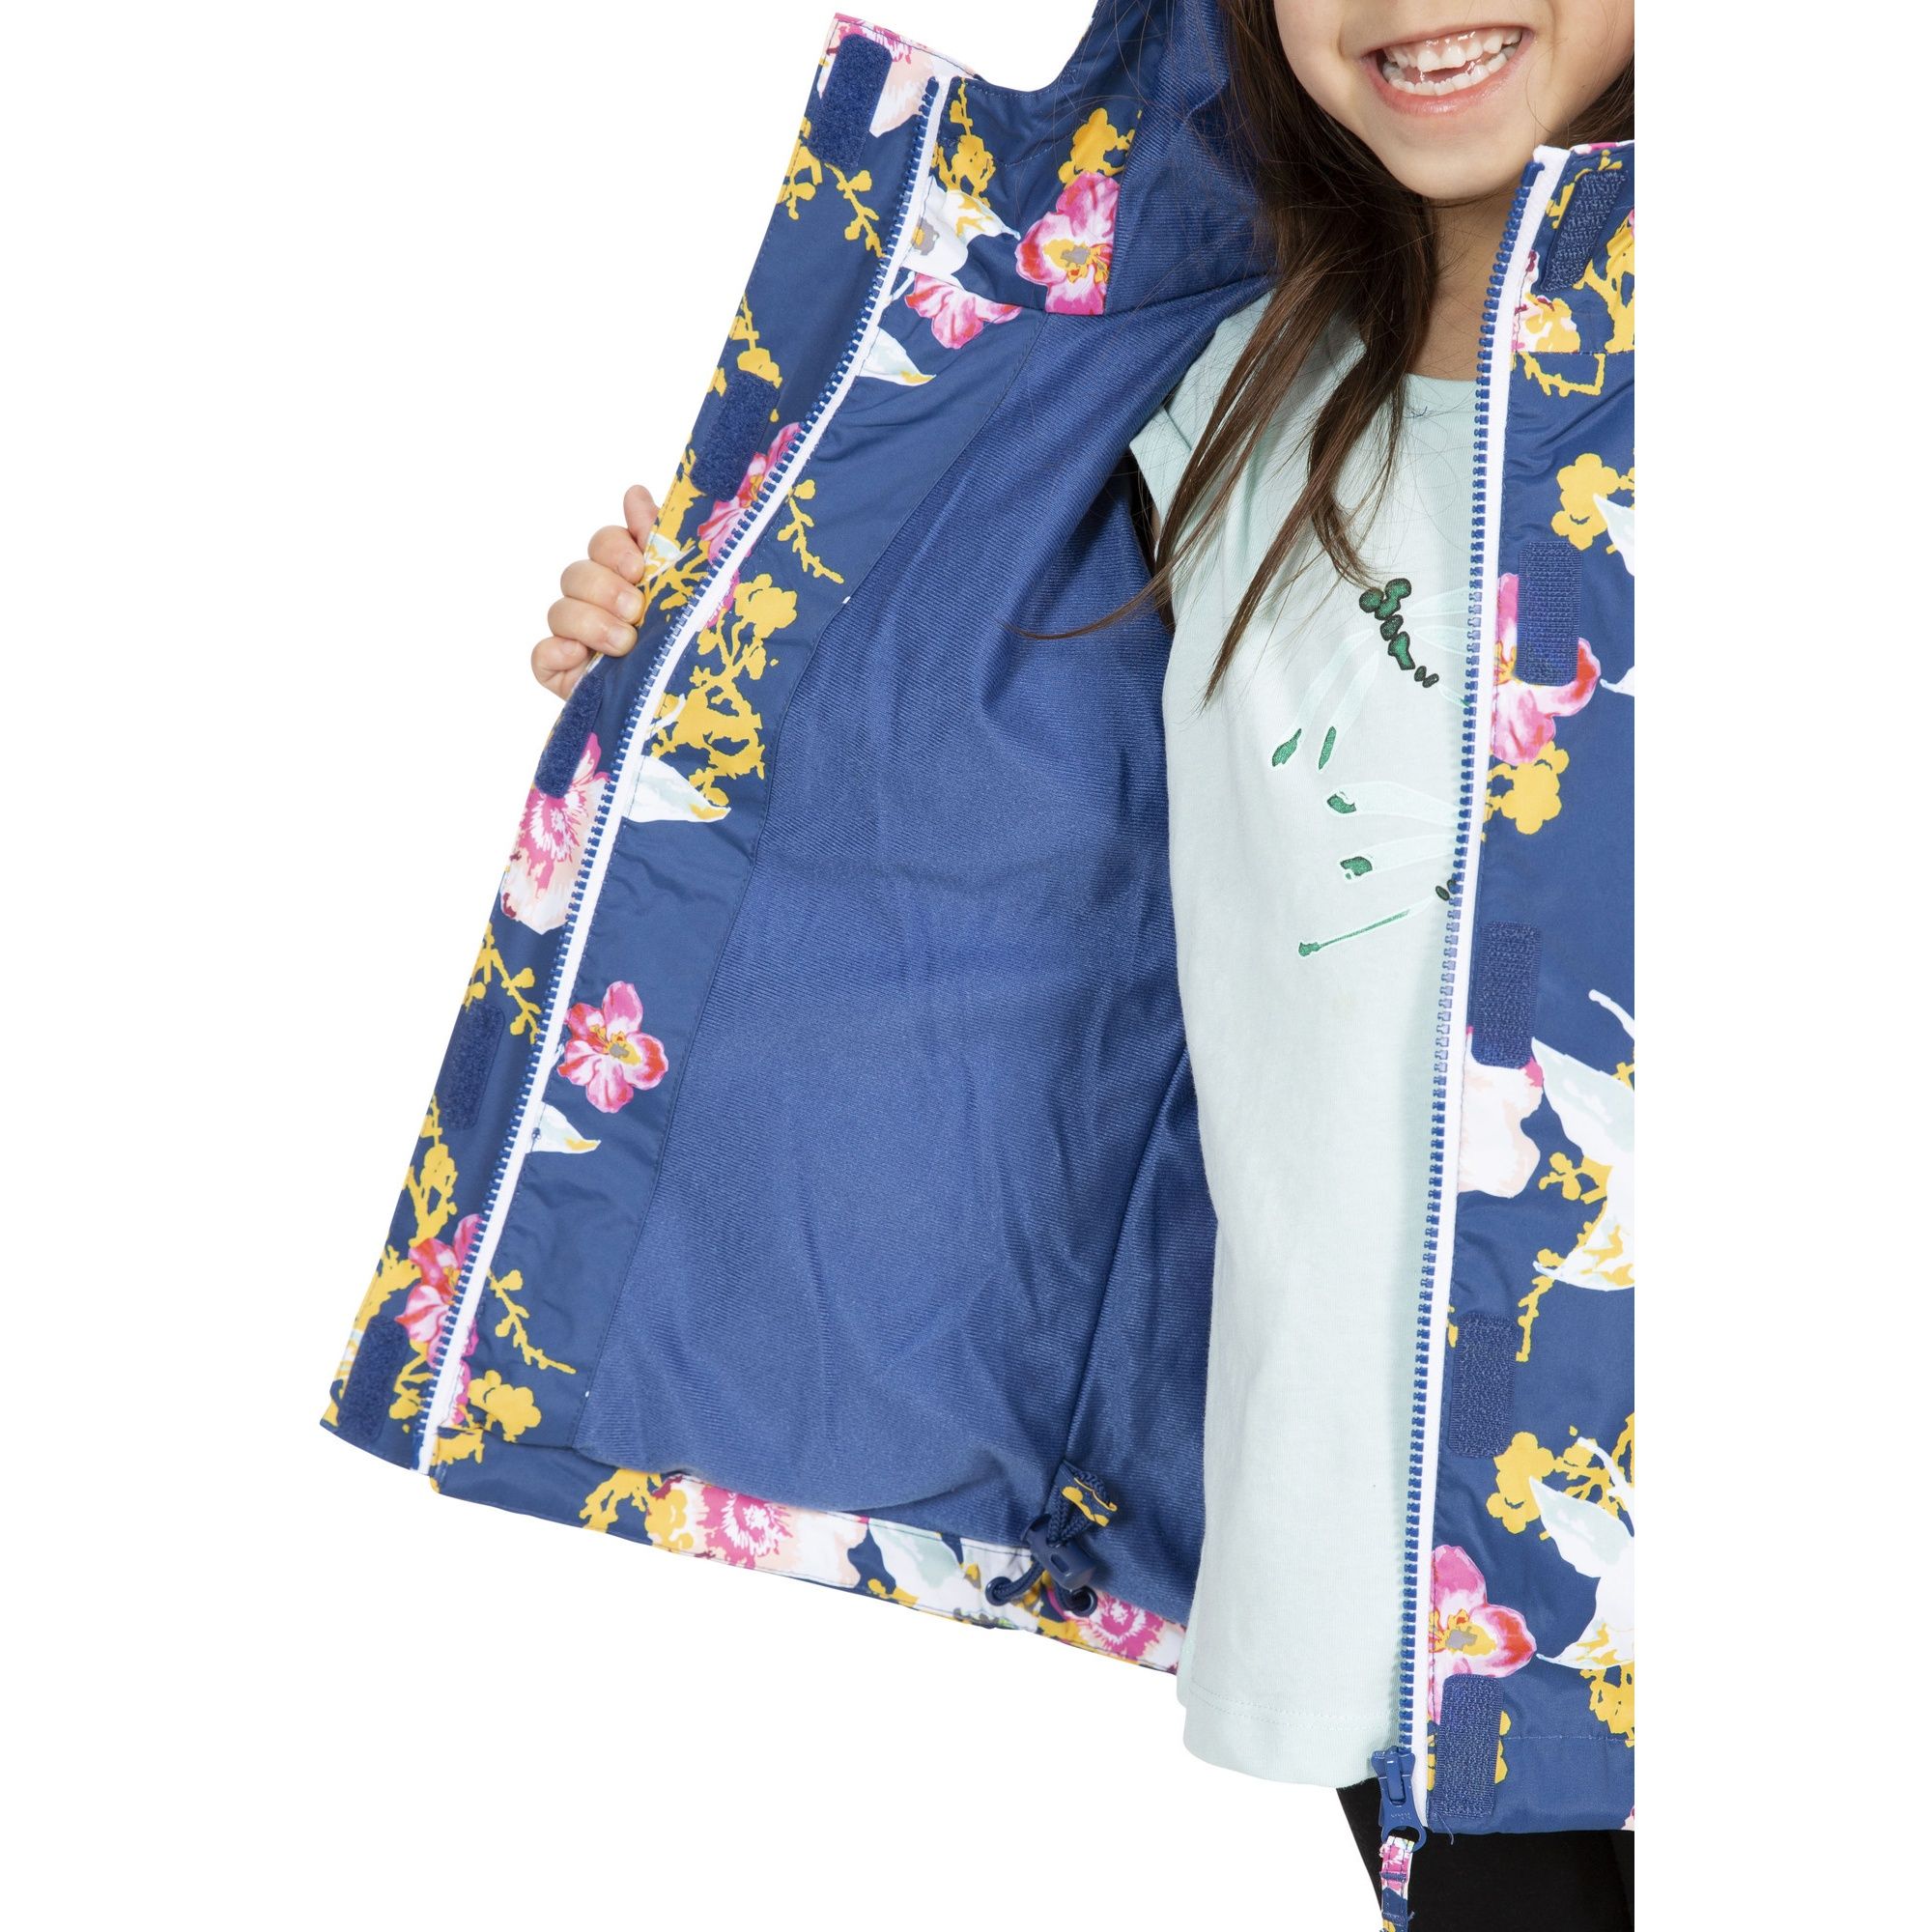 All over printed jacket. Grown on hood. 2 zip pockets. Adjustable cuffs. Waterproof 3000mm, windproof, taped seams. Shell: 100% Polyester, PVC coated, Lining: 100% Polyester. Trespass Childrens Chest Sizing (approx): 2/3 Years - 21in/53cm, 3/4 Years - 22in/56cm, 5/6 Years - 24in/61cm, 7/8 Years - 26in/66cm, 9/10 Years - 28in/71cm, 11/12 Years - 31in/79cm.